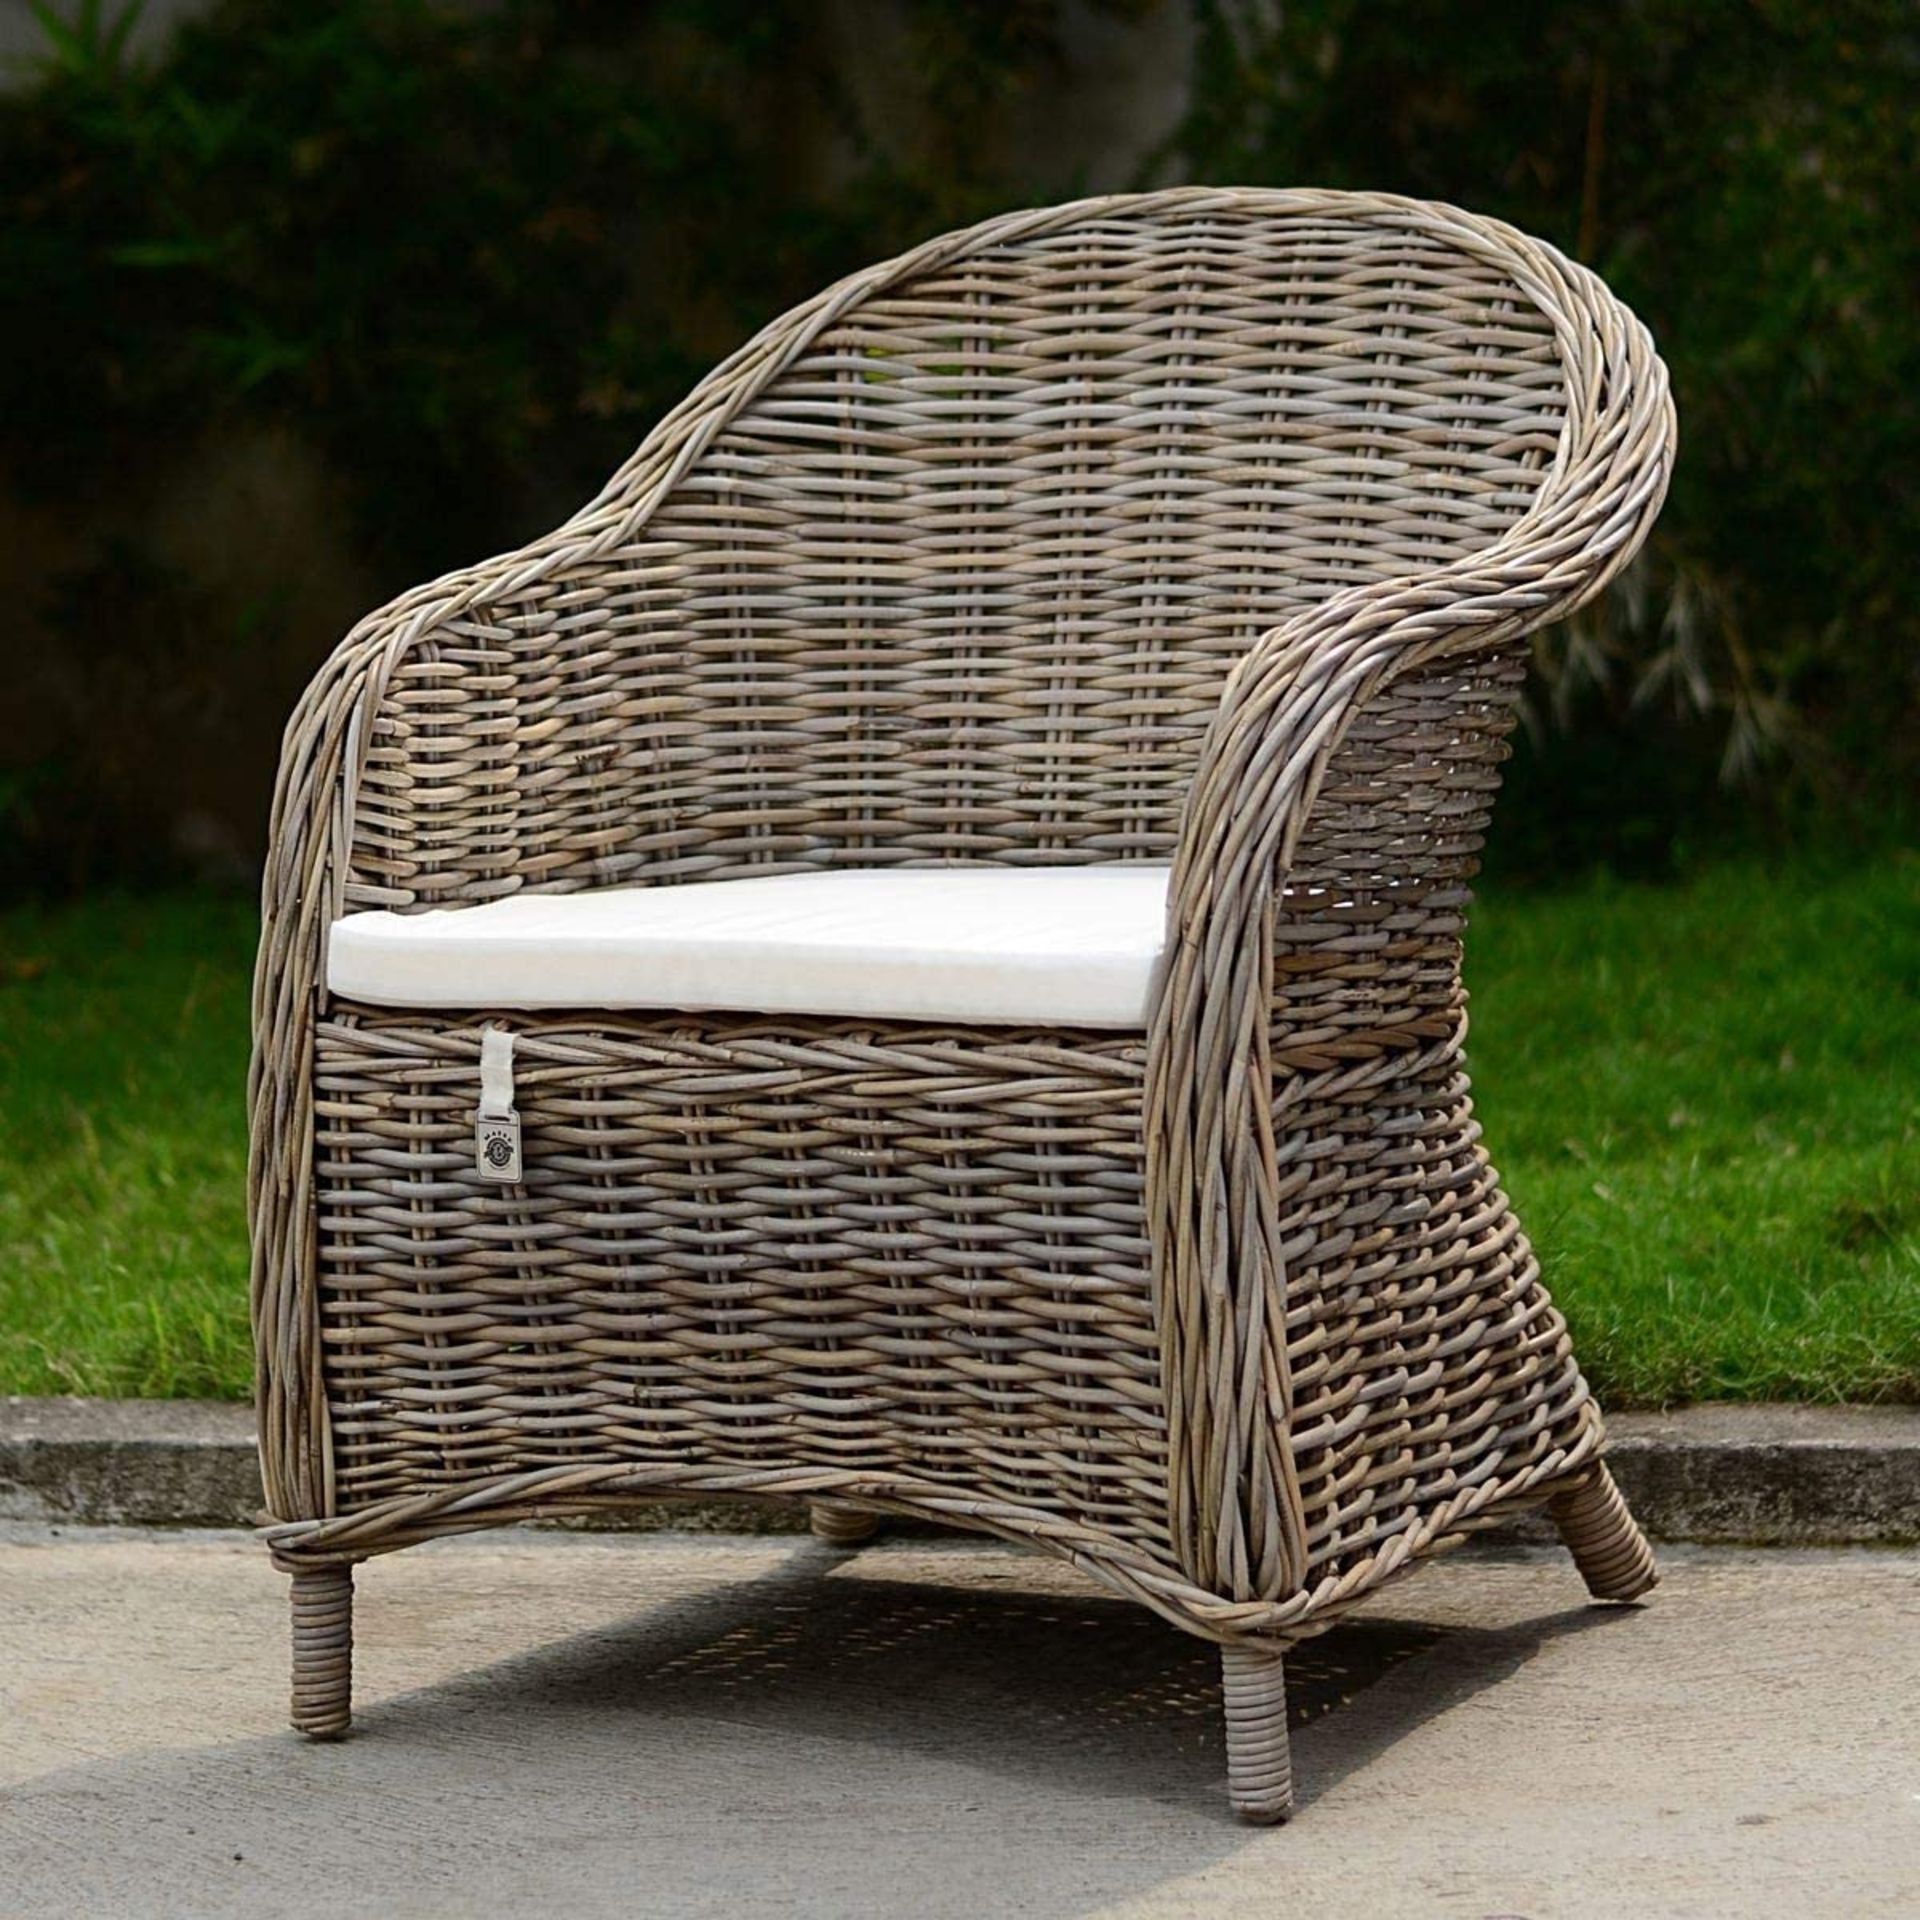 NEW & BOXED 2x Maine Furniture Co. Kubu Rattan Armchair with Cushion. (SR5). (SKU: M500156). STRONG, - Image 4 of 5